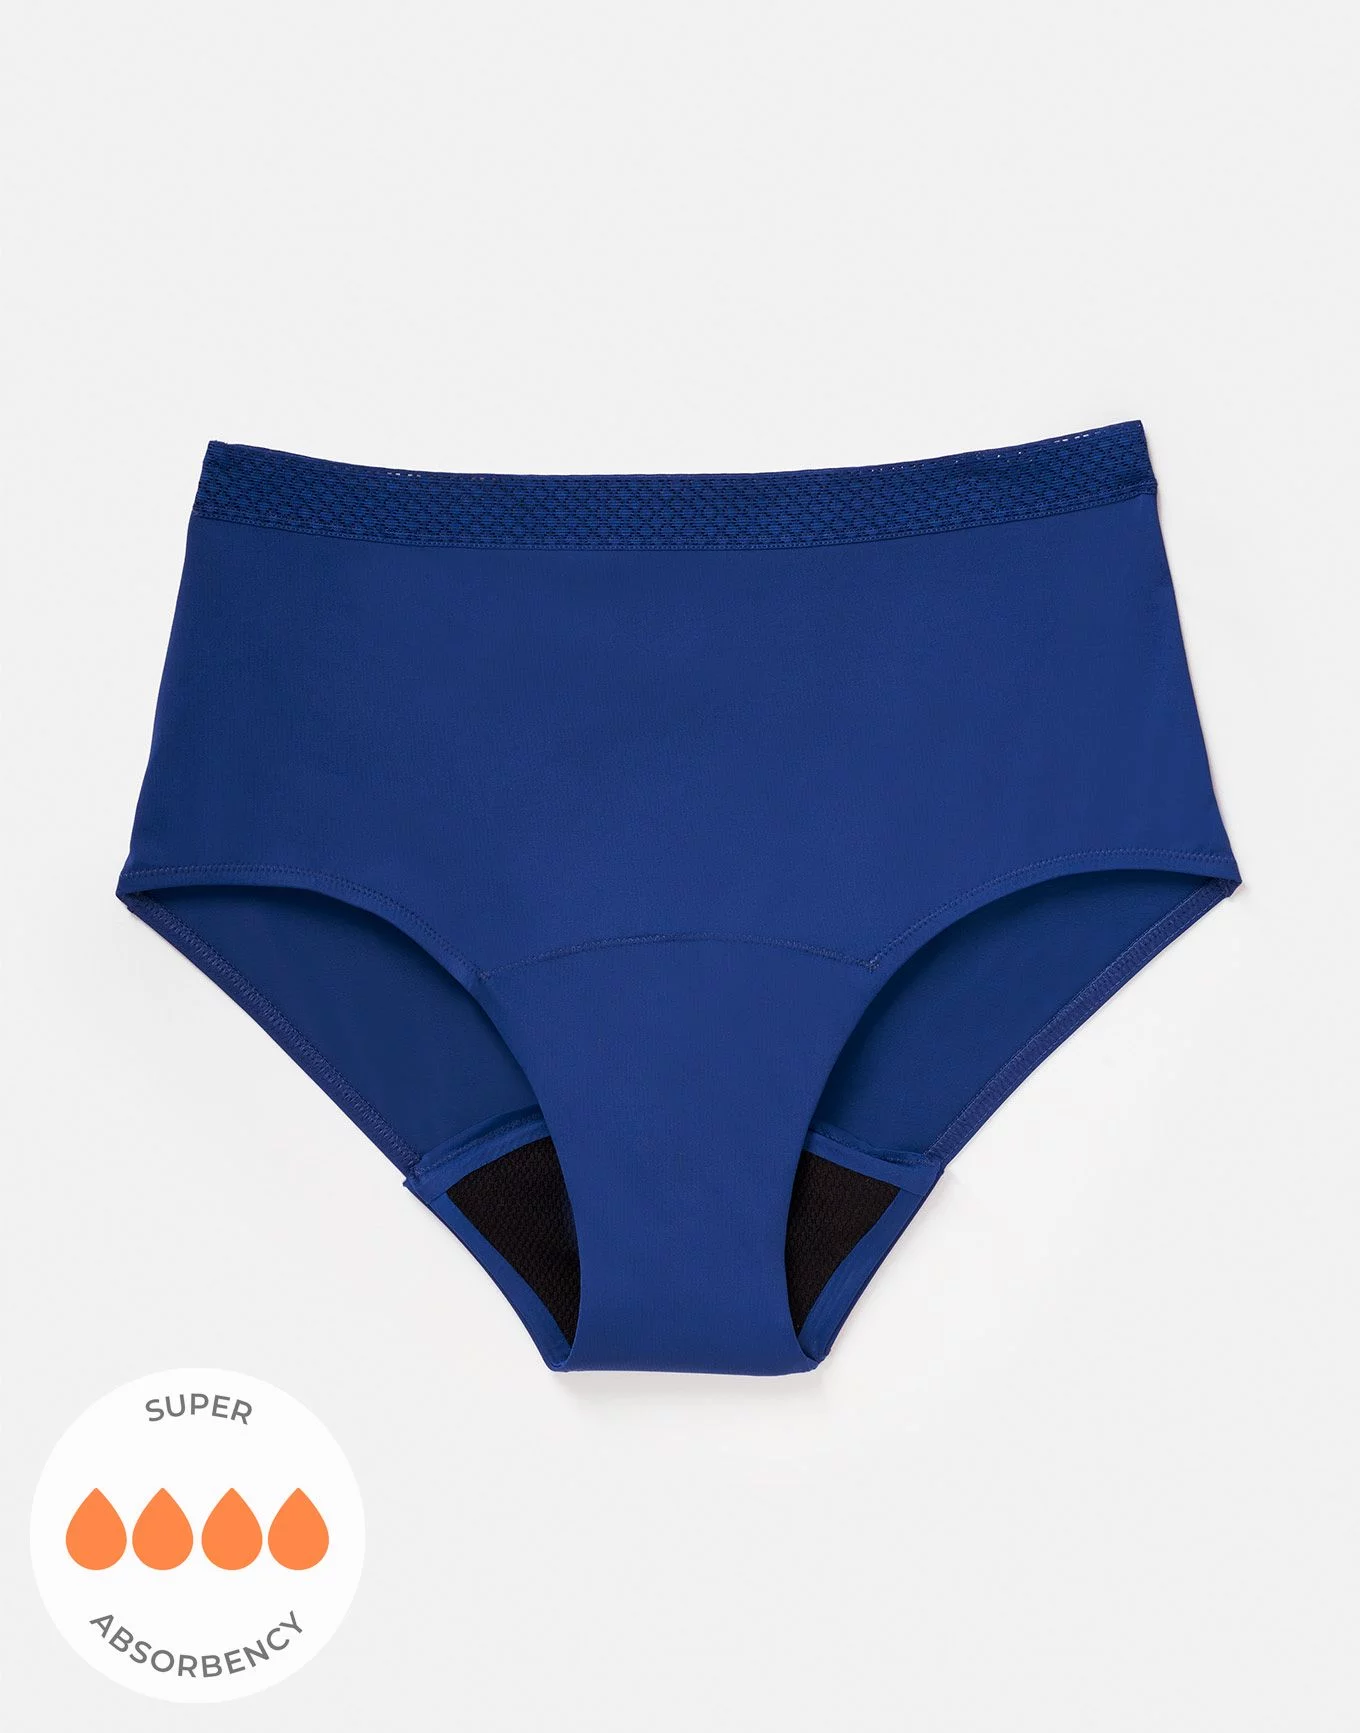 High End Mid Waist Panty: Set With Shaping Body, Plus Size Cotton Briefs  And Shorts For A Slimmer Look From Blueberry15, $14.9